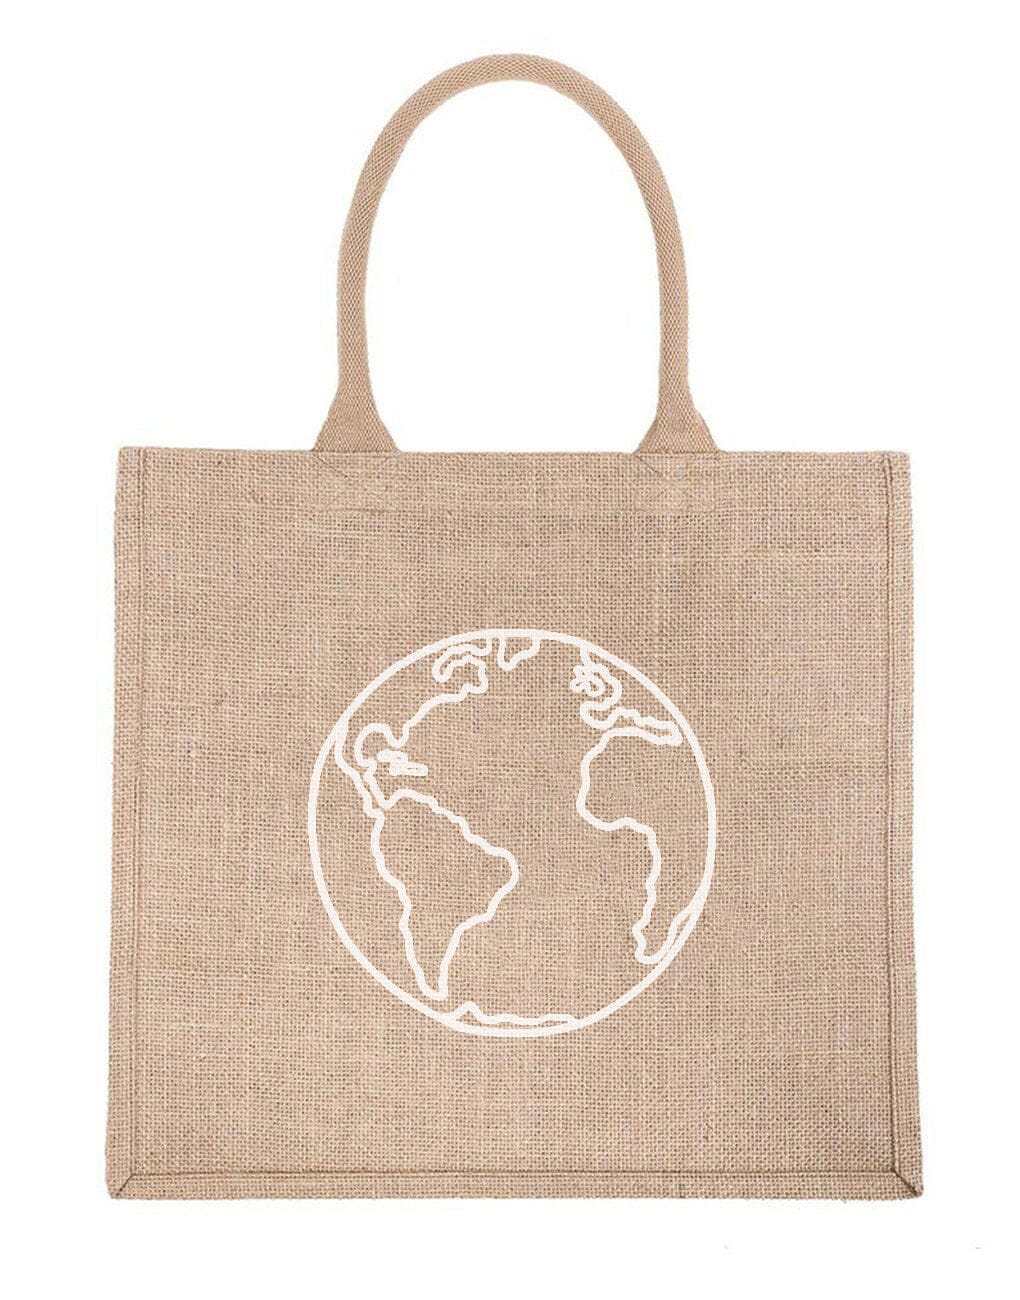 Large Earth Day Every Day Reusable Shopping Tote In White Font | The Little Market